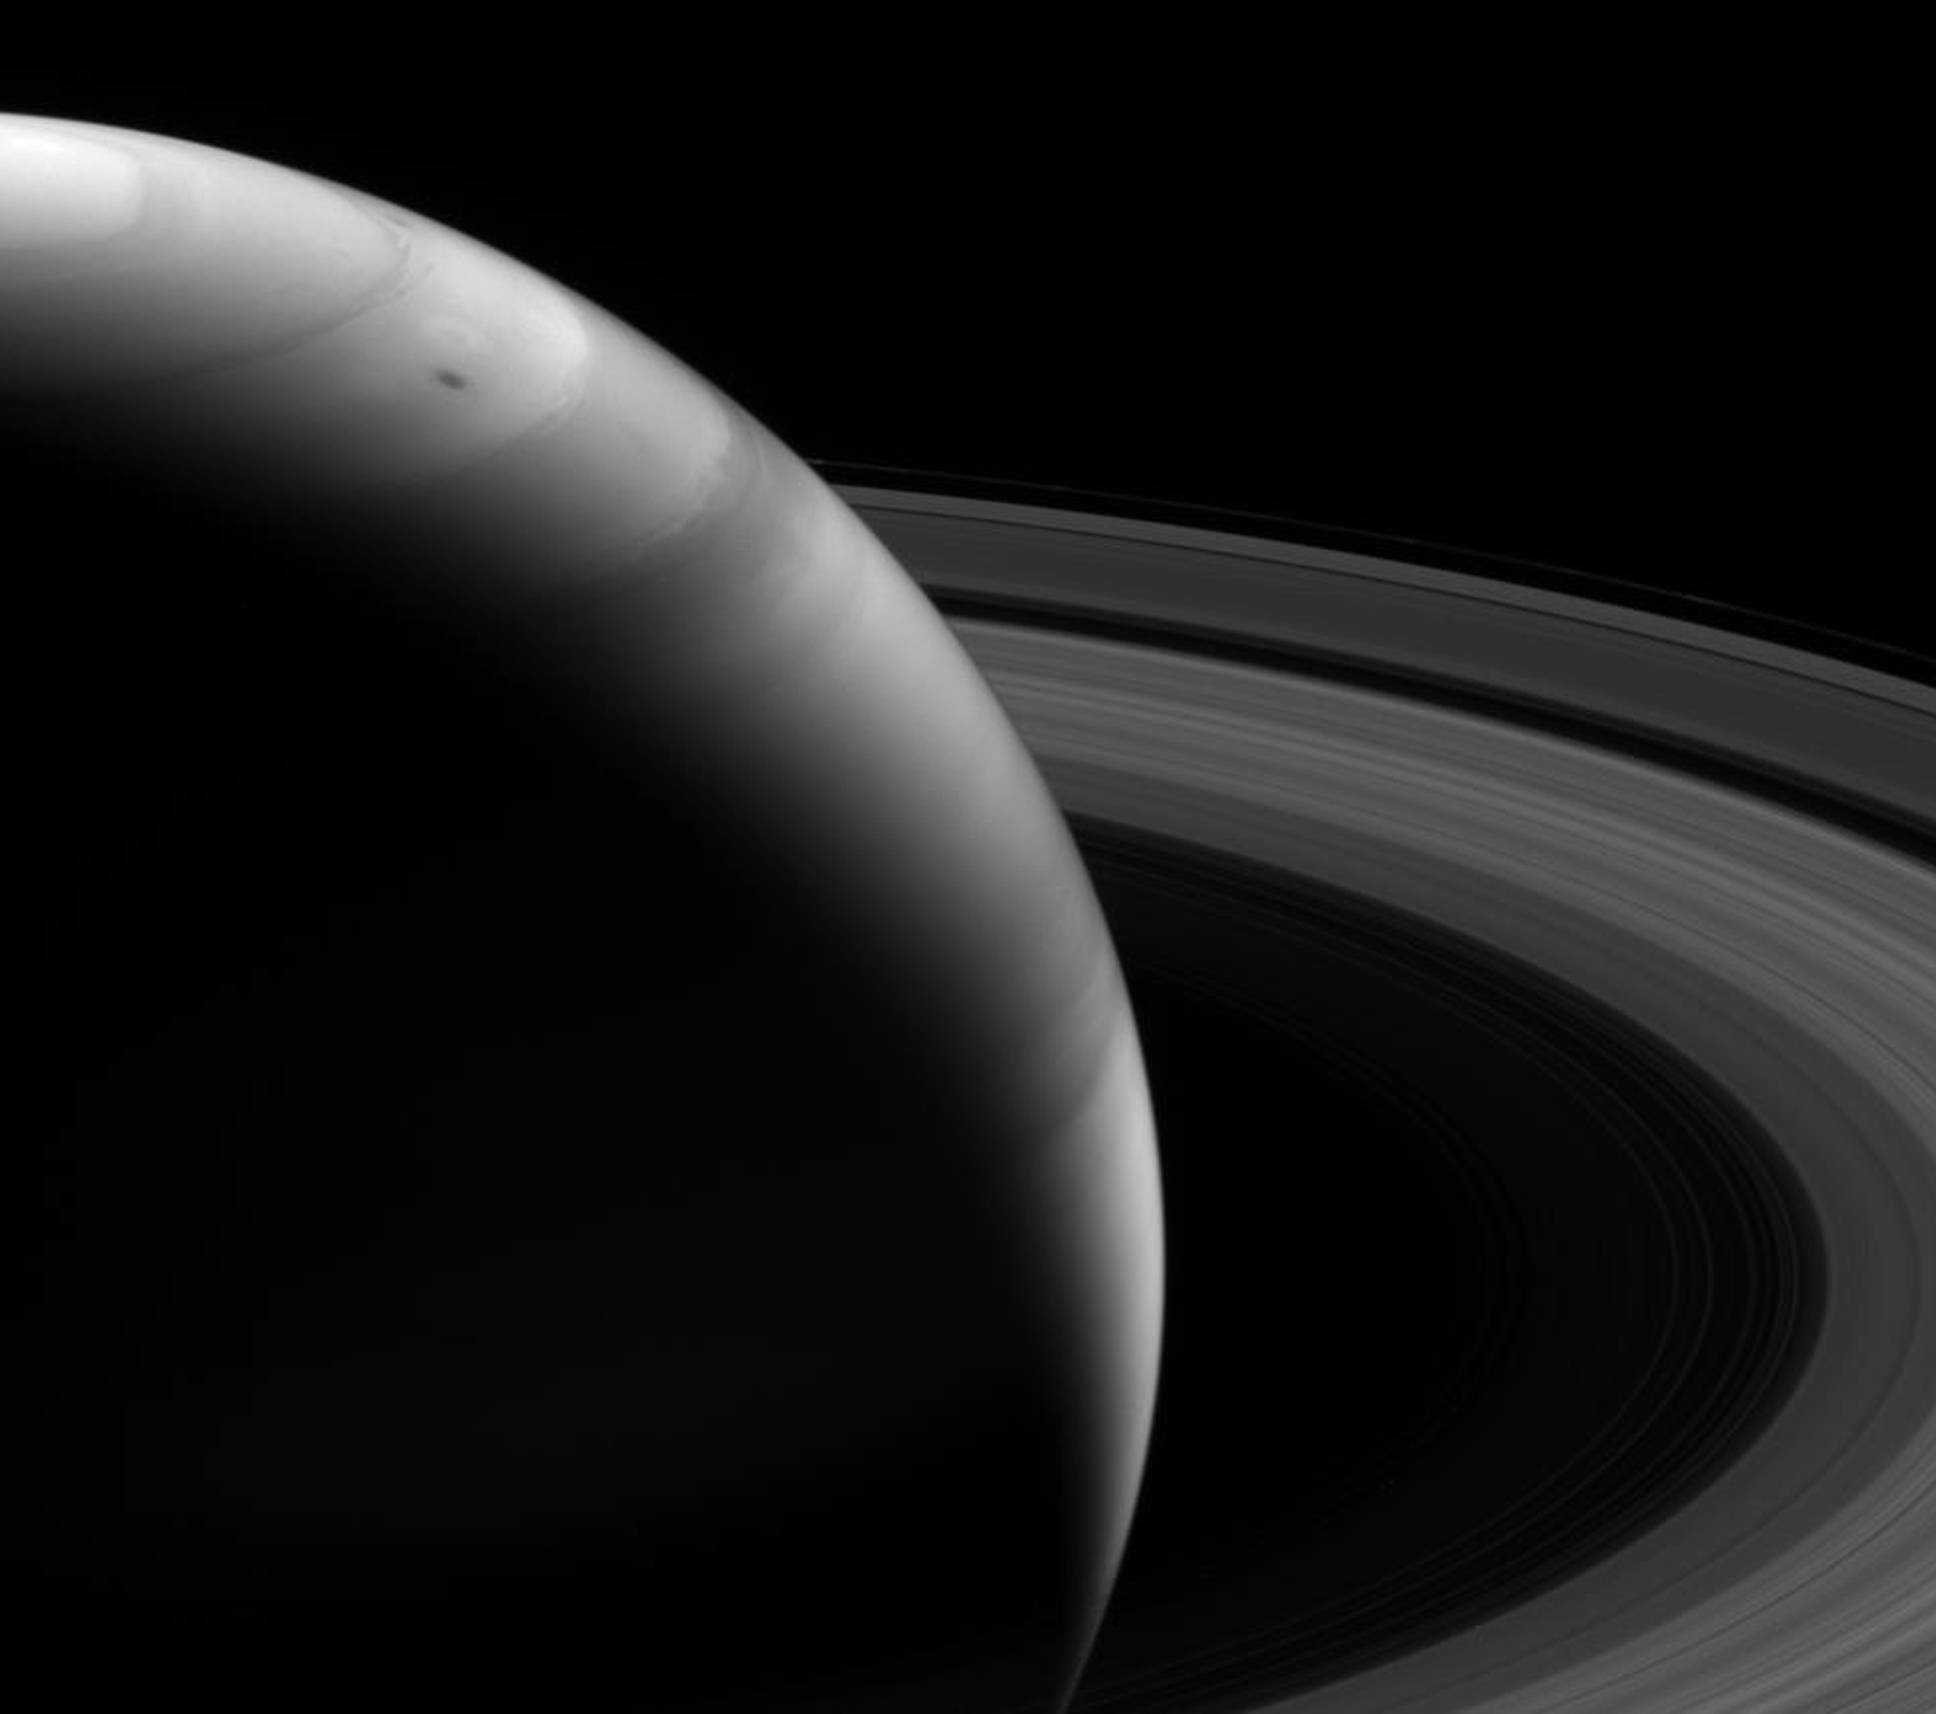 This NASA image obtained November 20, 2013, taken by the Cassini spacecraft shows a view that looks toward the sunlit side of the rings of Saturn from about 18 degrees above the ringplane. The image was taken with the Cassini spacecraft wide-angle camera on August 12, 2013 using a spectral filter sensitive to wavelengths of near-infrared light centered at 728 nanometers.The view was acquired at a distance of approximately 994,000 miles (1.6 million kilometers) from Saturn. Image scale is 57 miles (92 kilometers) per pixel. AFP PHOTO/NASA/HANDOUT
=RESTRICTED TO EDITORIAL USE-MANDATORY CREDIT "AFP PHOTO/NASA/JPL-Caltech/Space Science Institute" - NO MARKETING NO ADVETISING CAMPAIGNS-DISTRIBUTED AS A SERVICE TO CLIENTS= 
 / AFP PHOTO / NASA / HANDOUT